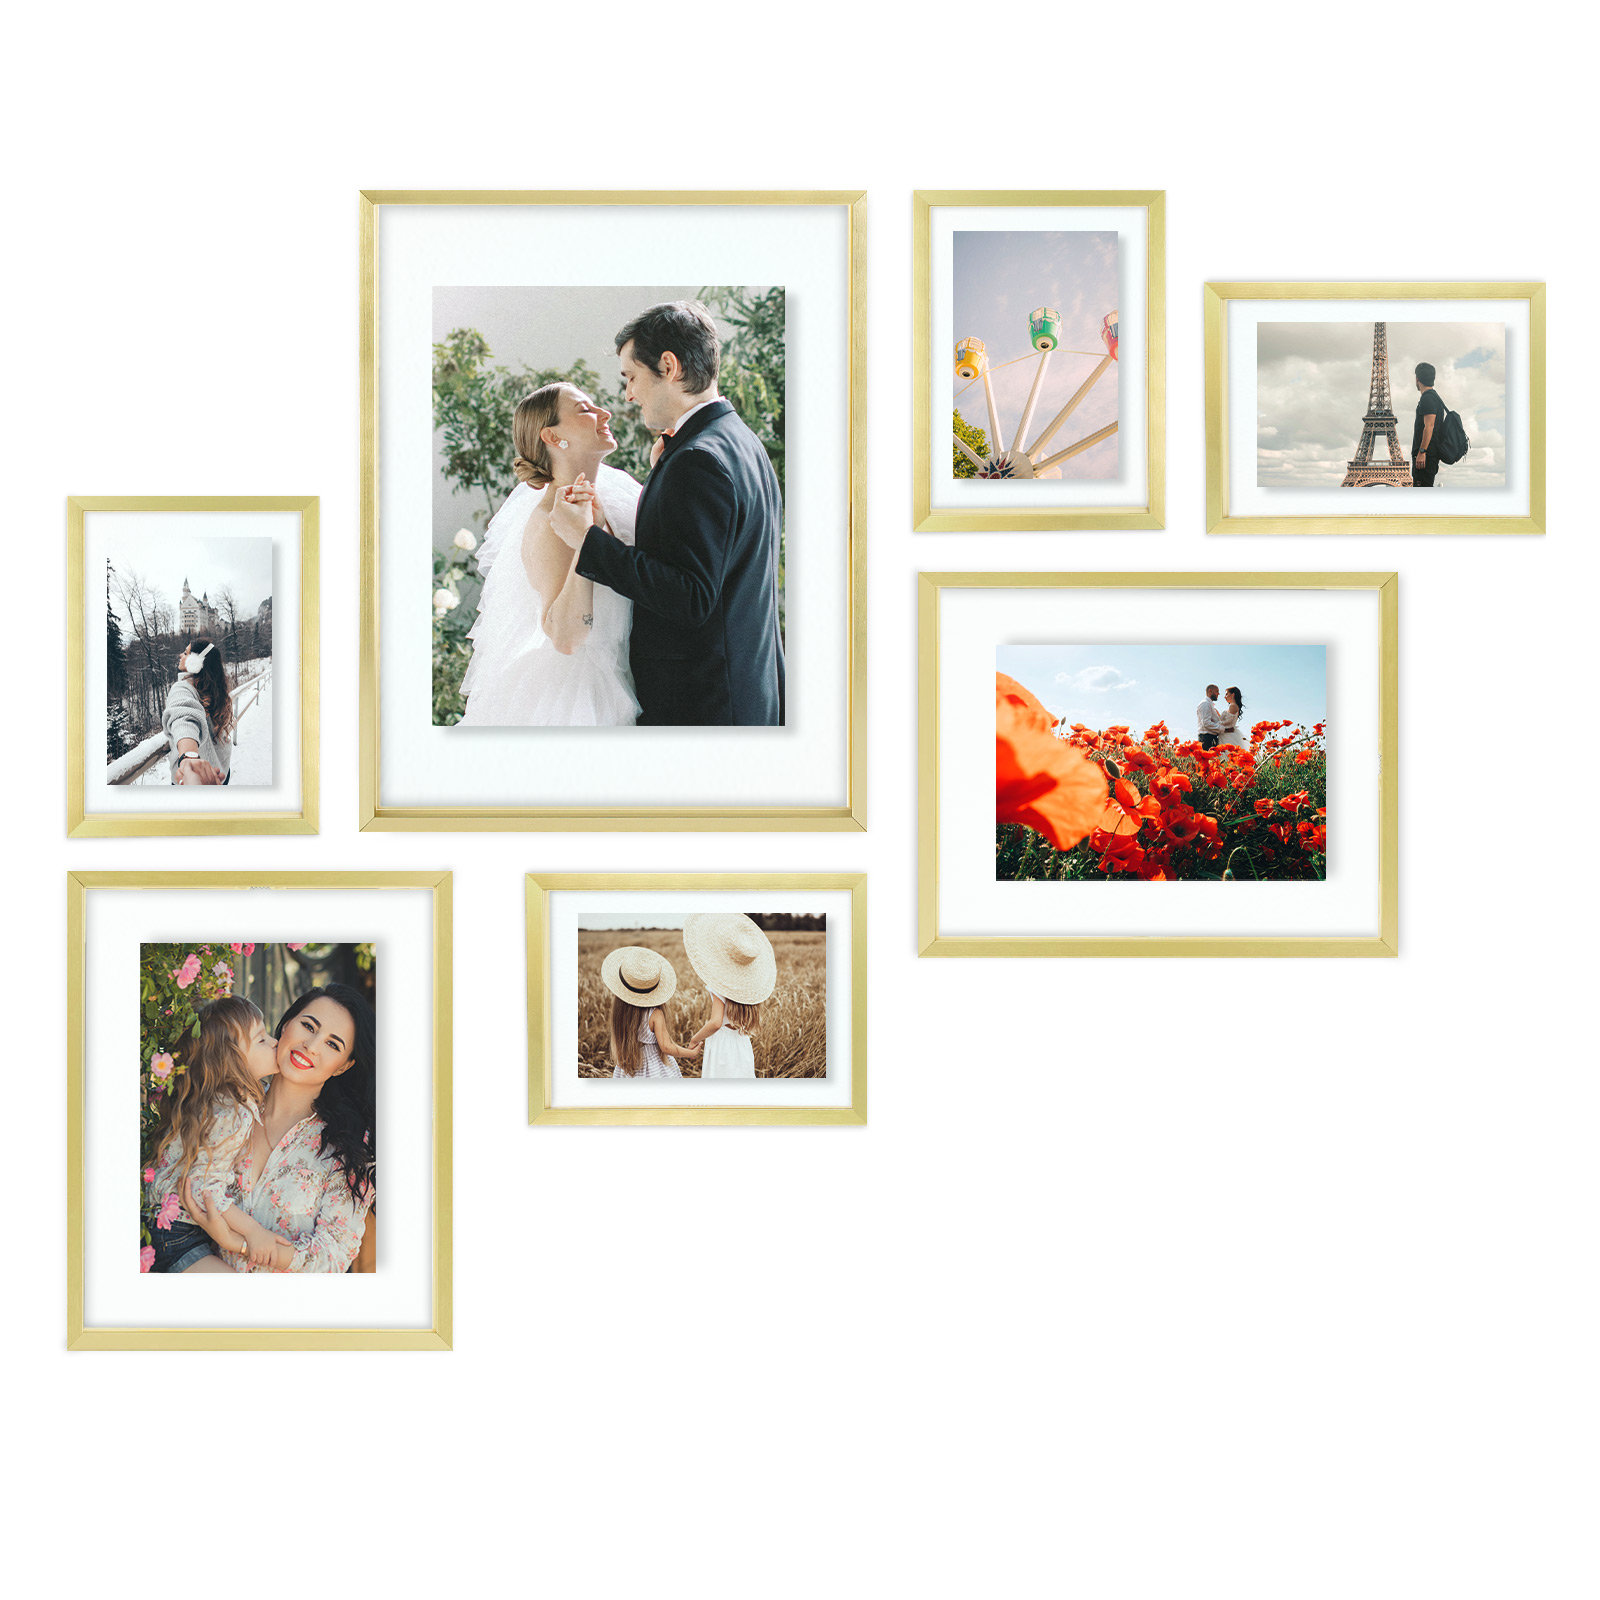 Golden State Art Picture Mat 8x10 for 5x7 Photos Pack of 20 Assorted Colors